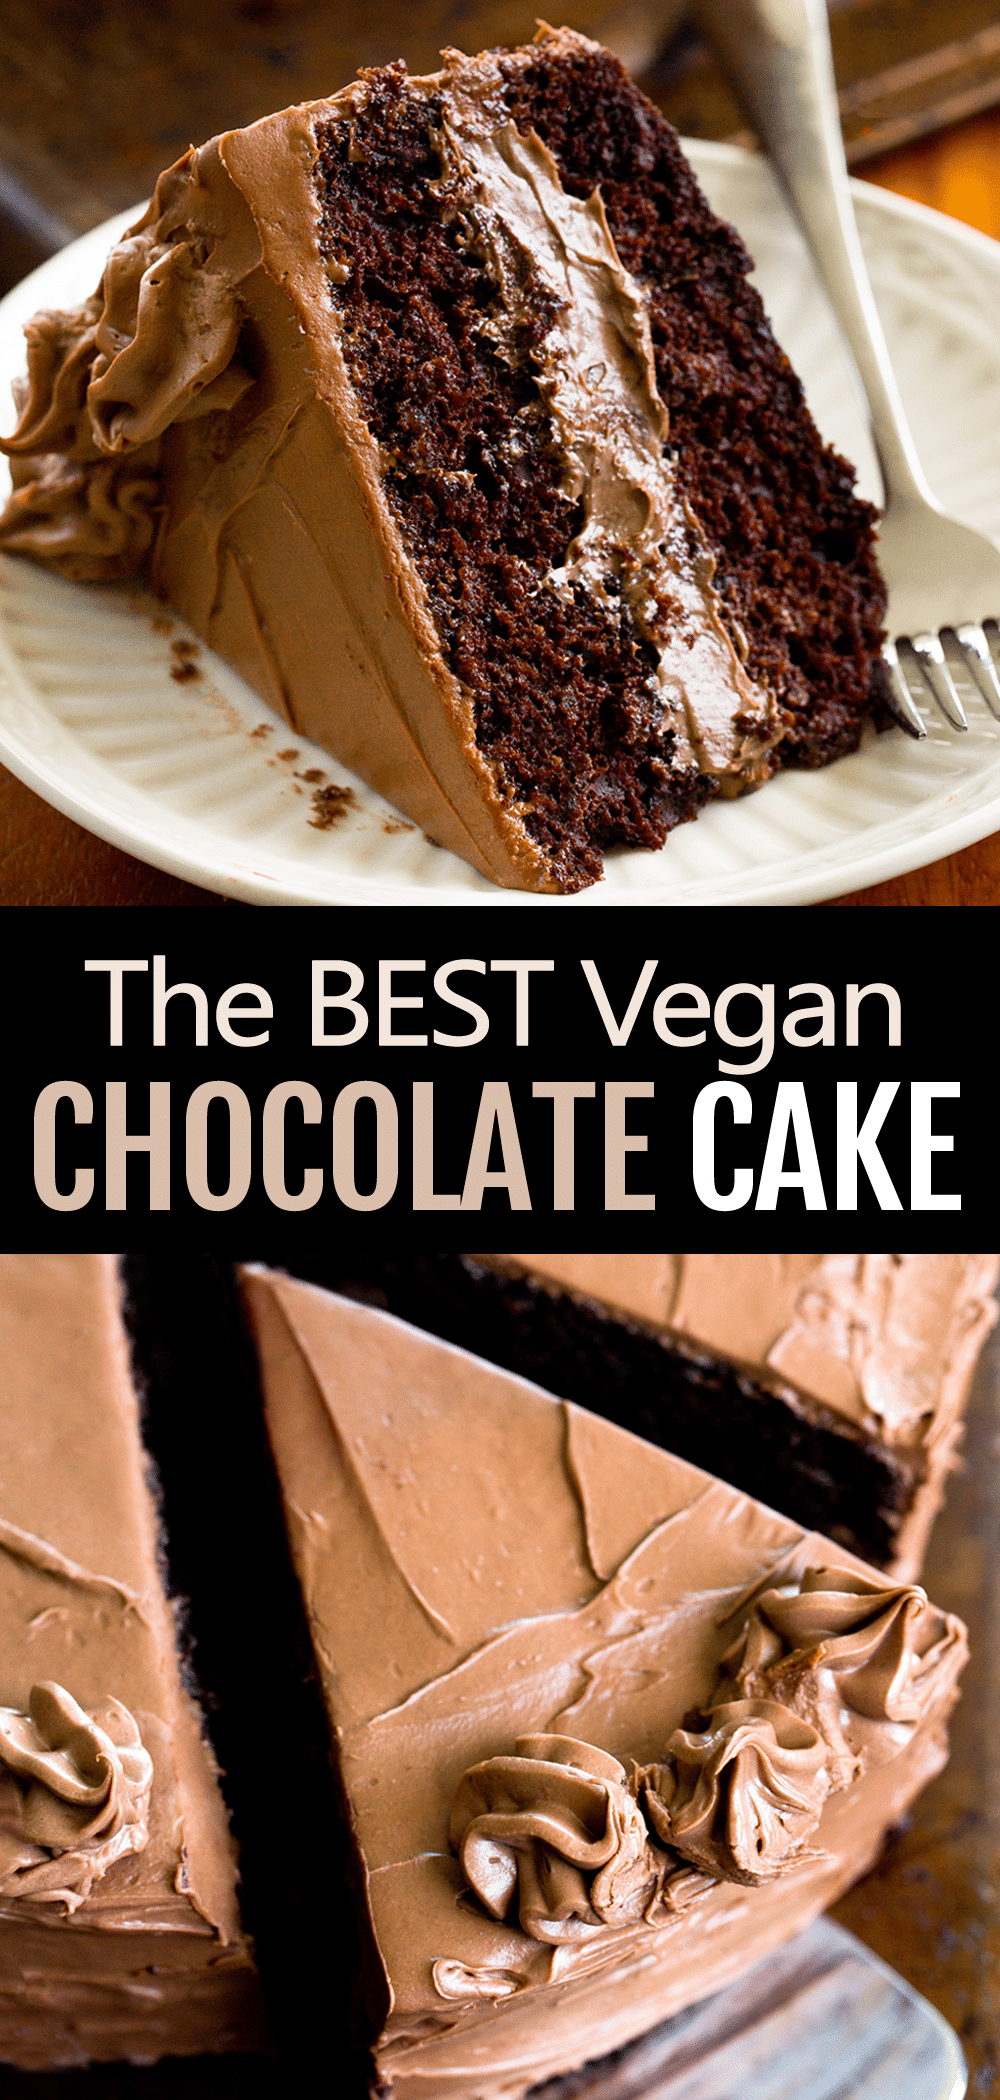 How To Make The Best Vegan Chocolate Cake With Frosting